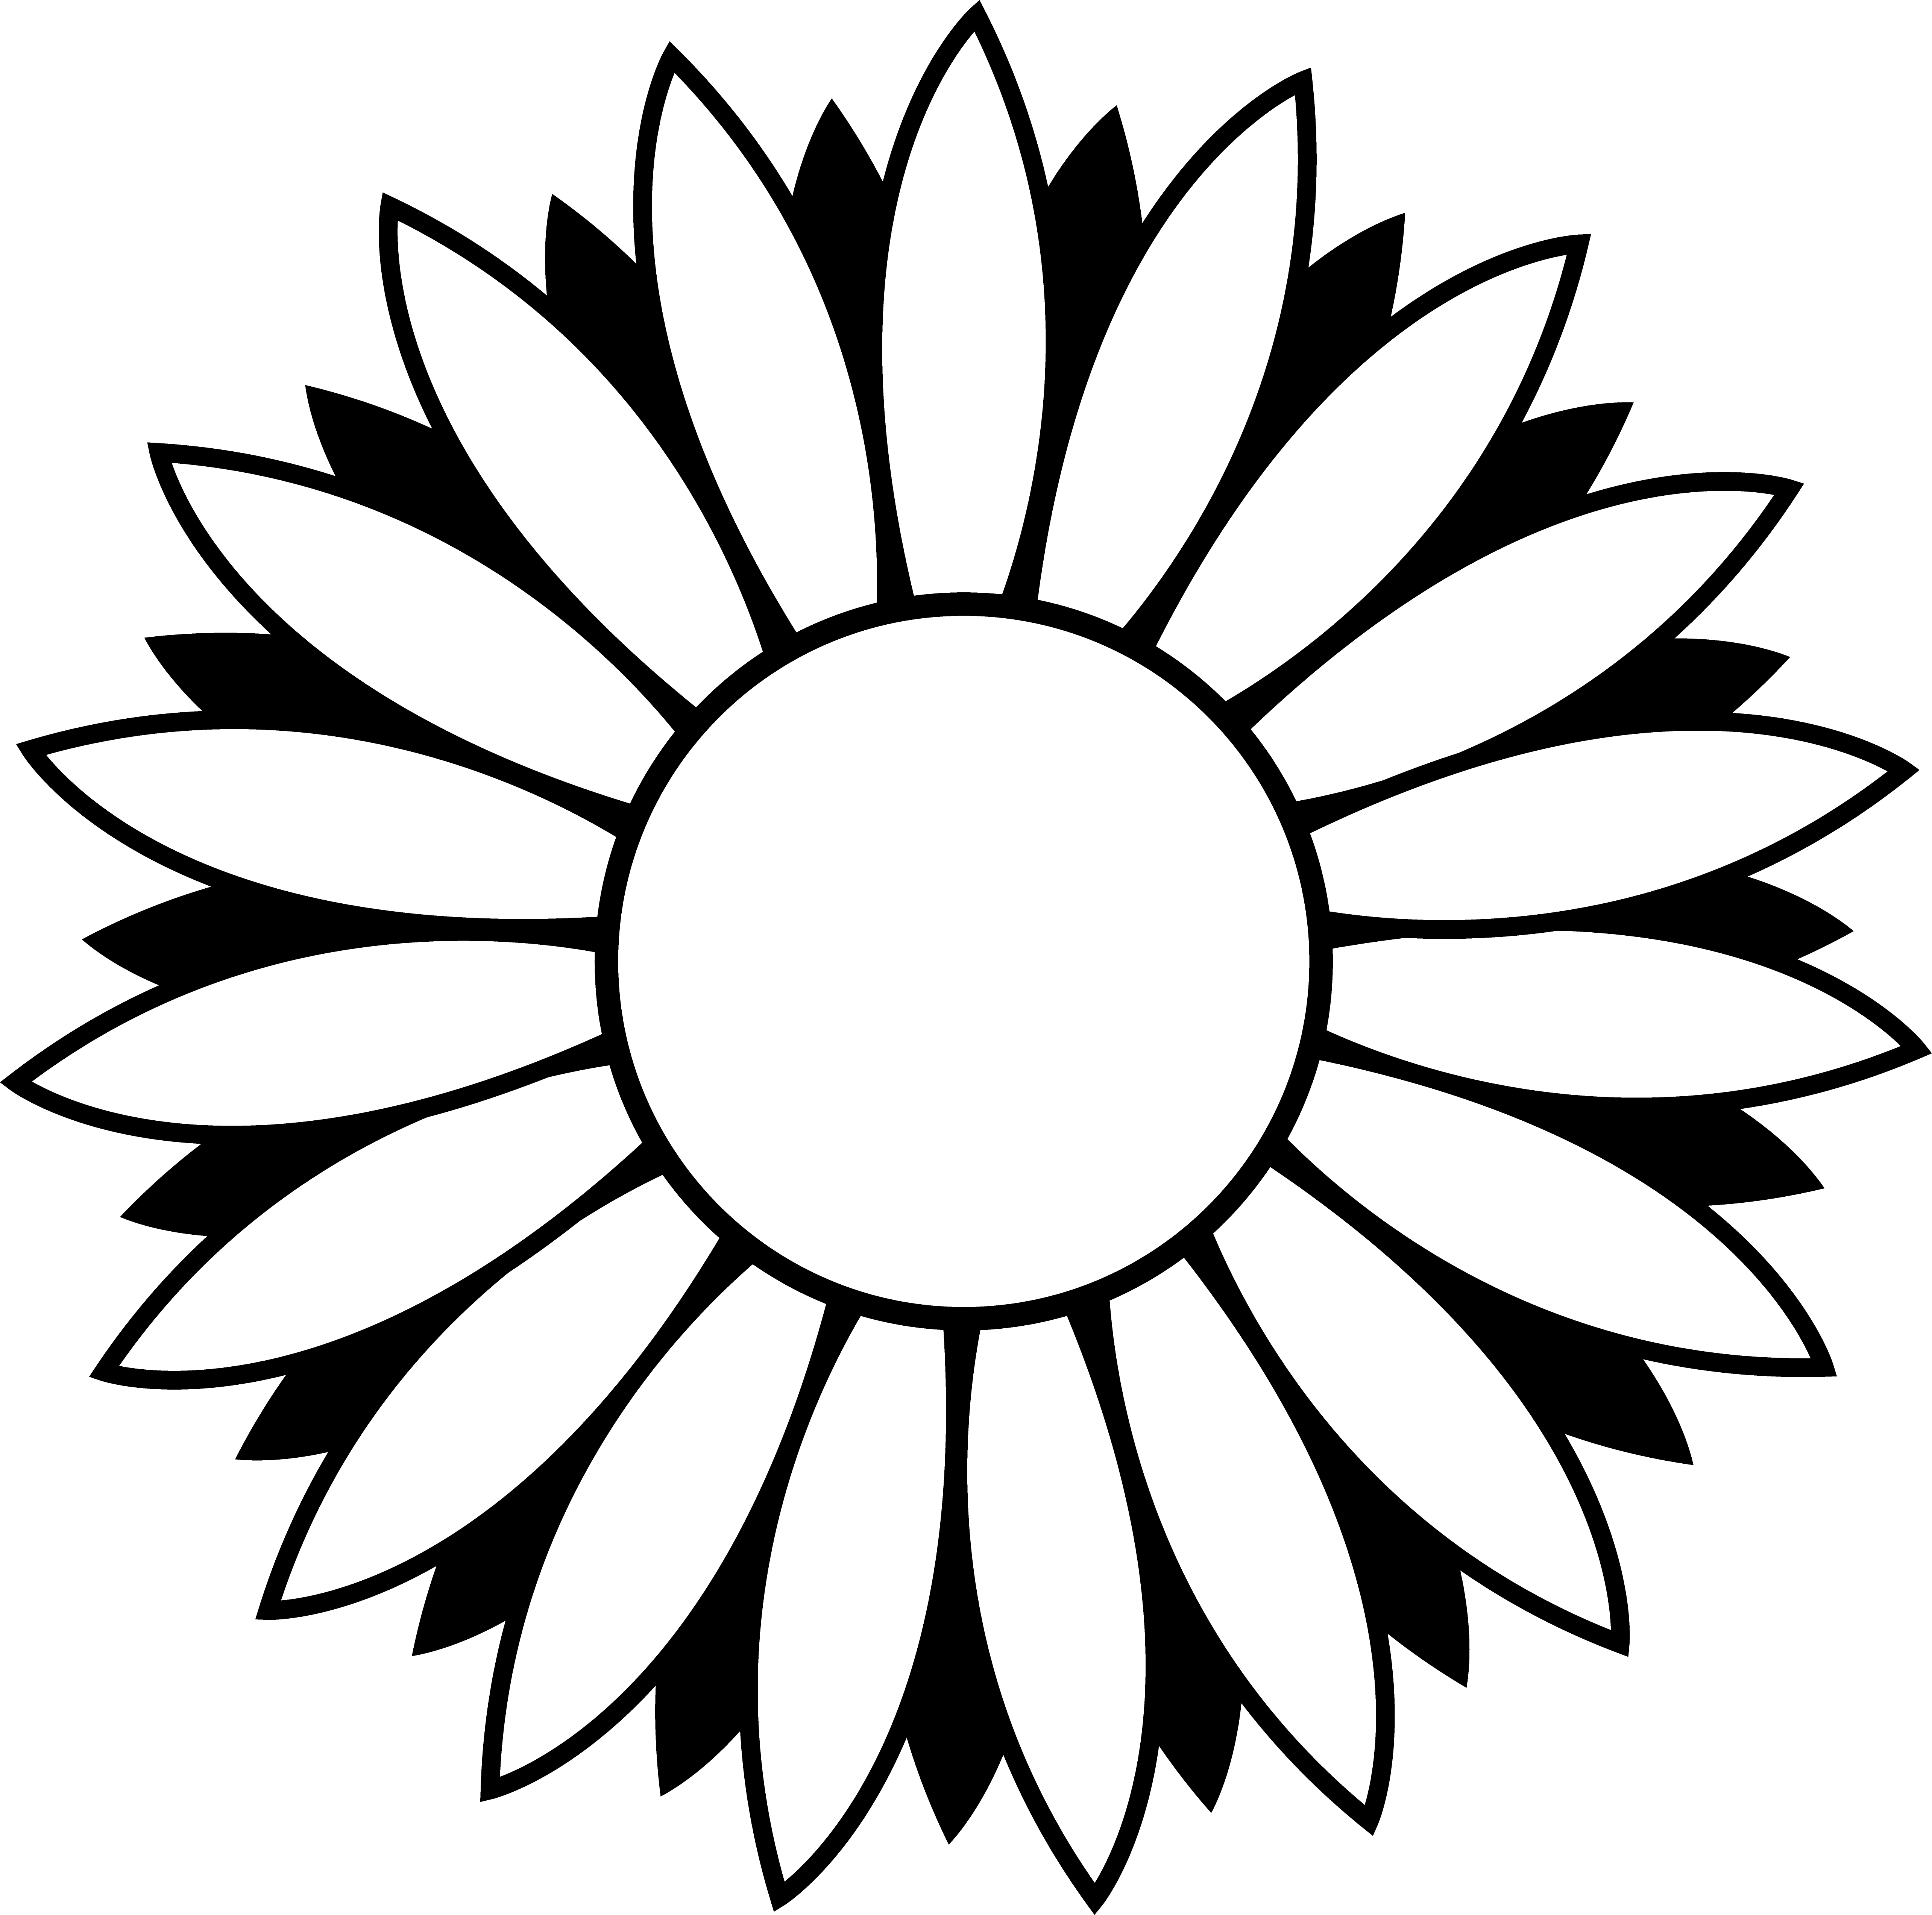 Free Sunflower Line Art Download Free Clip Art Free Clip Art On Clipart Library